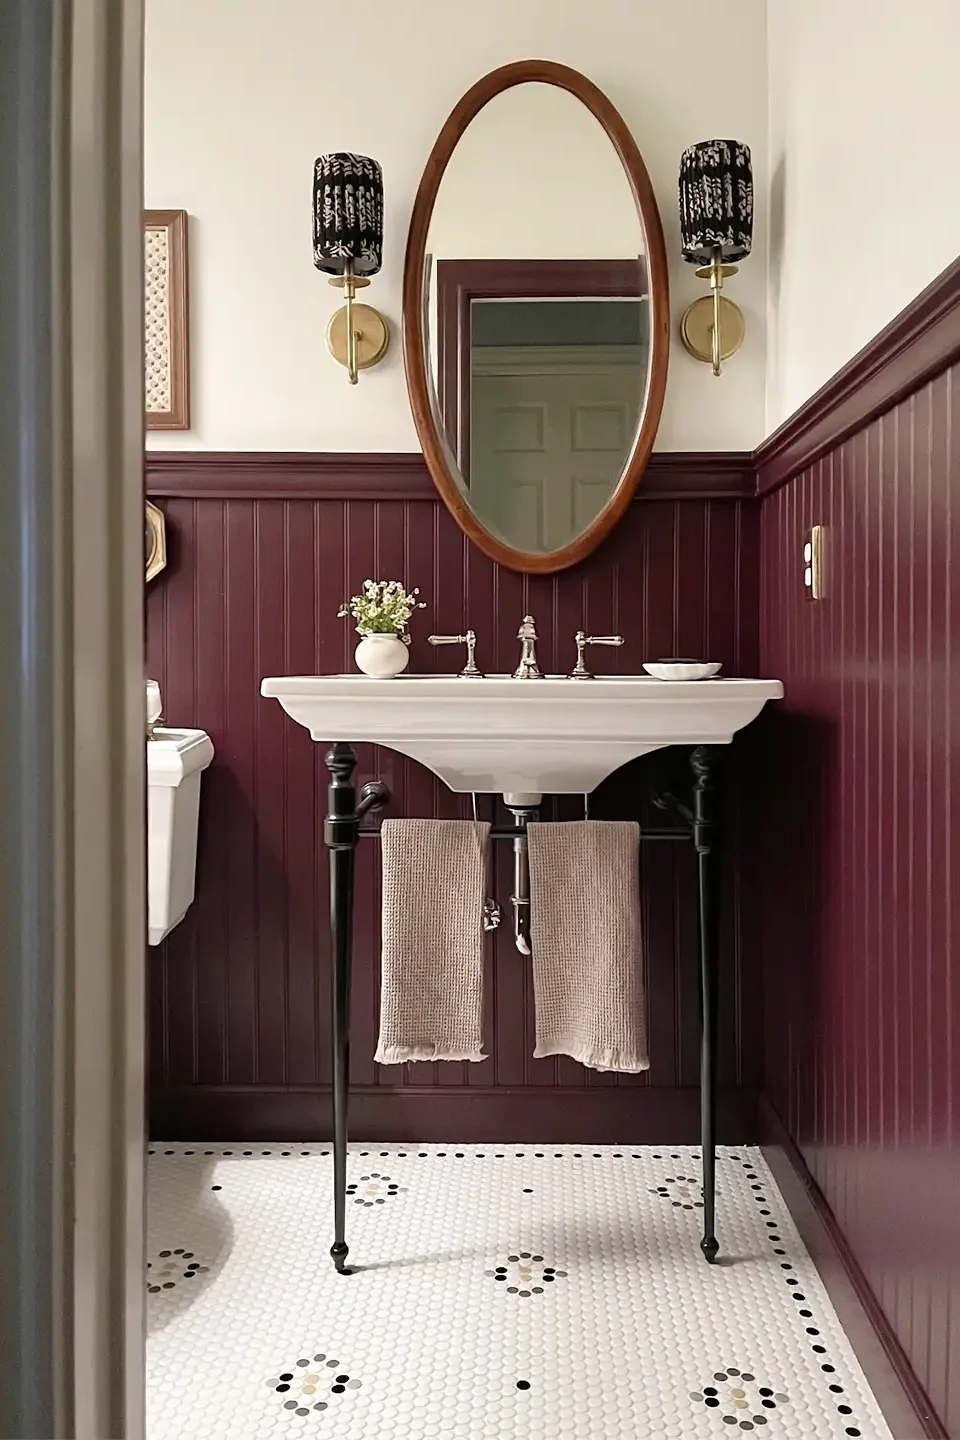 Bathroom with burgundy wainscoting and oval mirror.